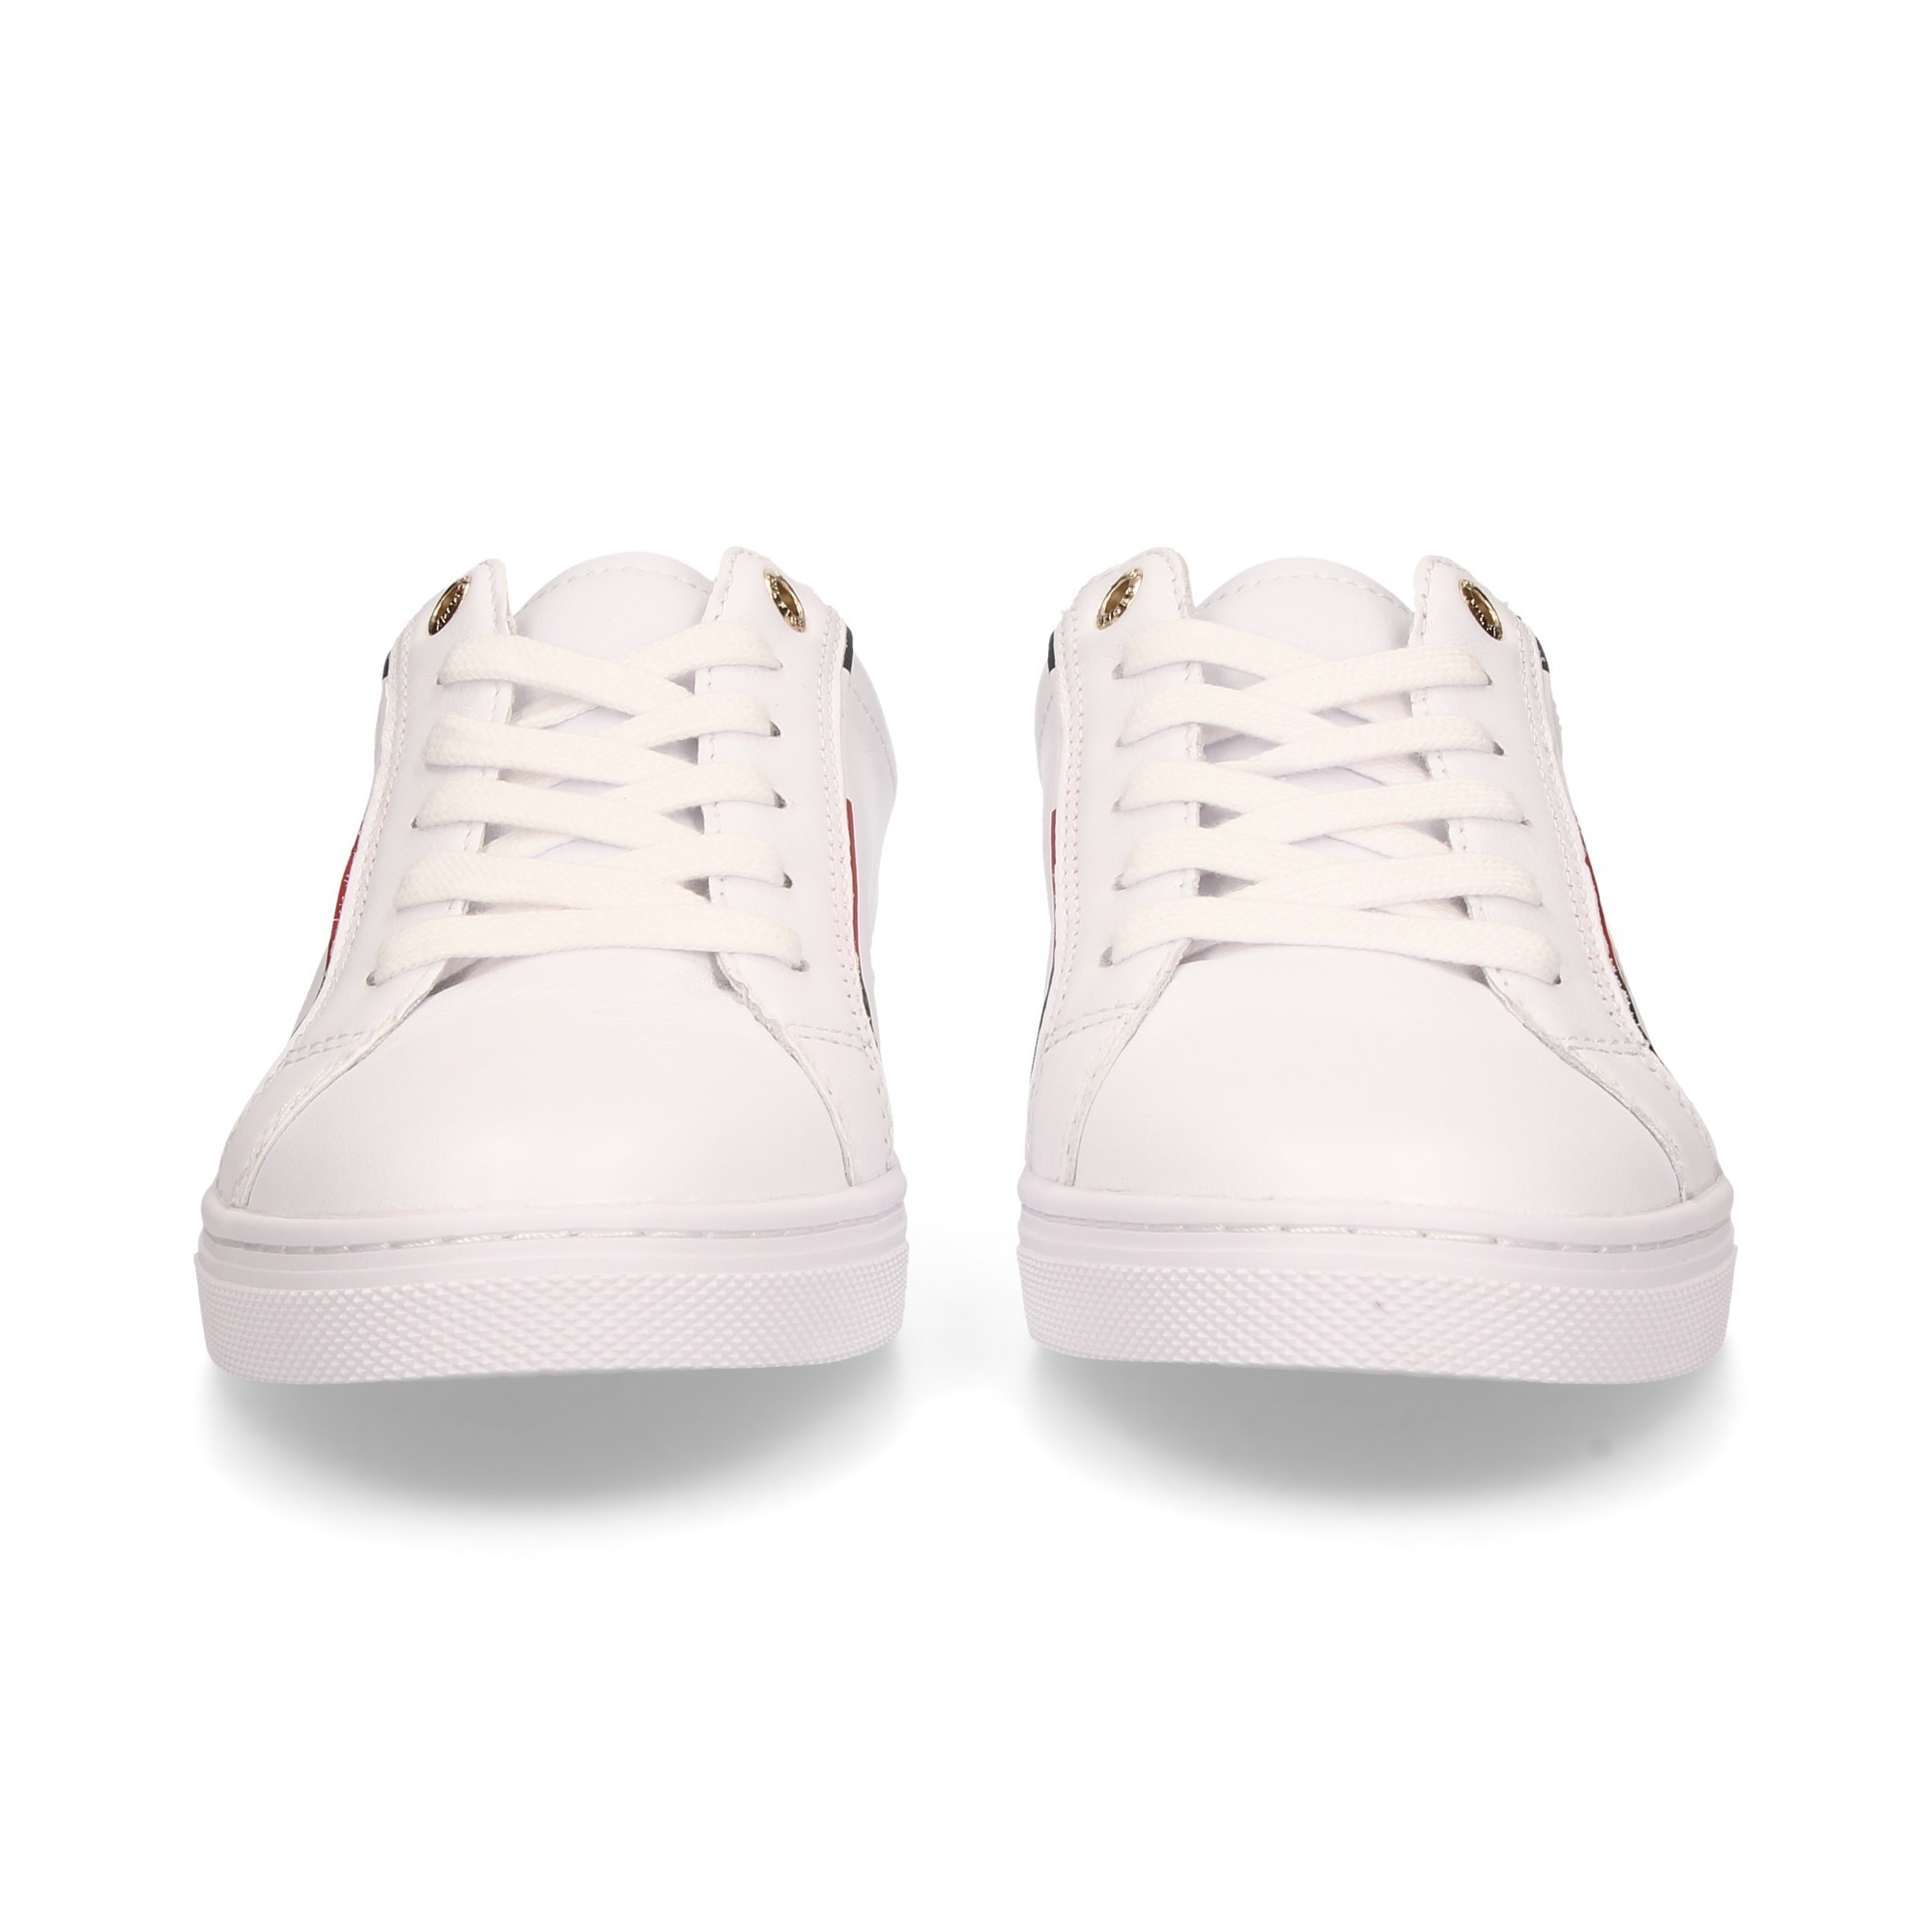 sporty-signature-white-leather-side